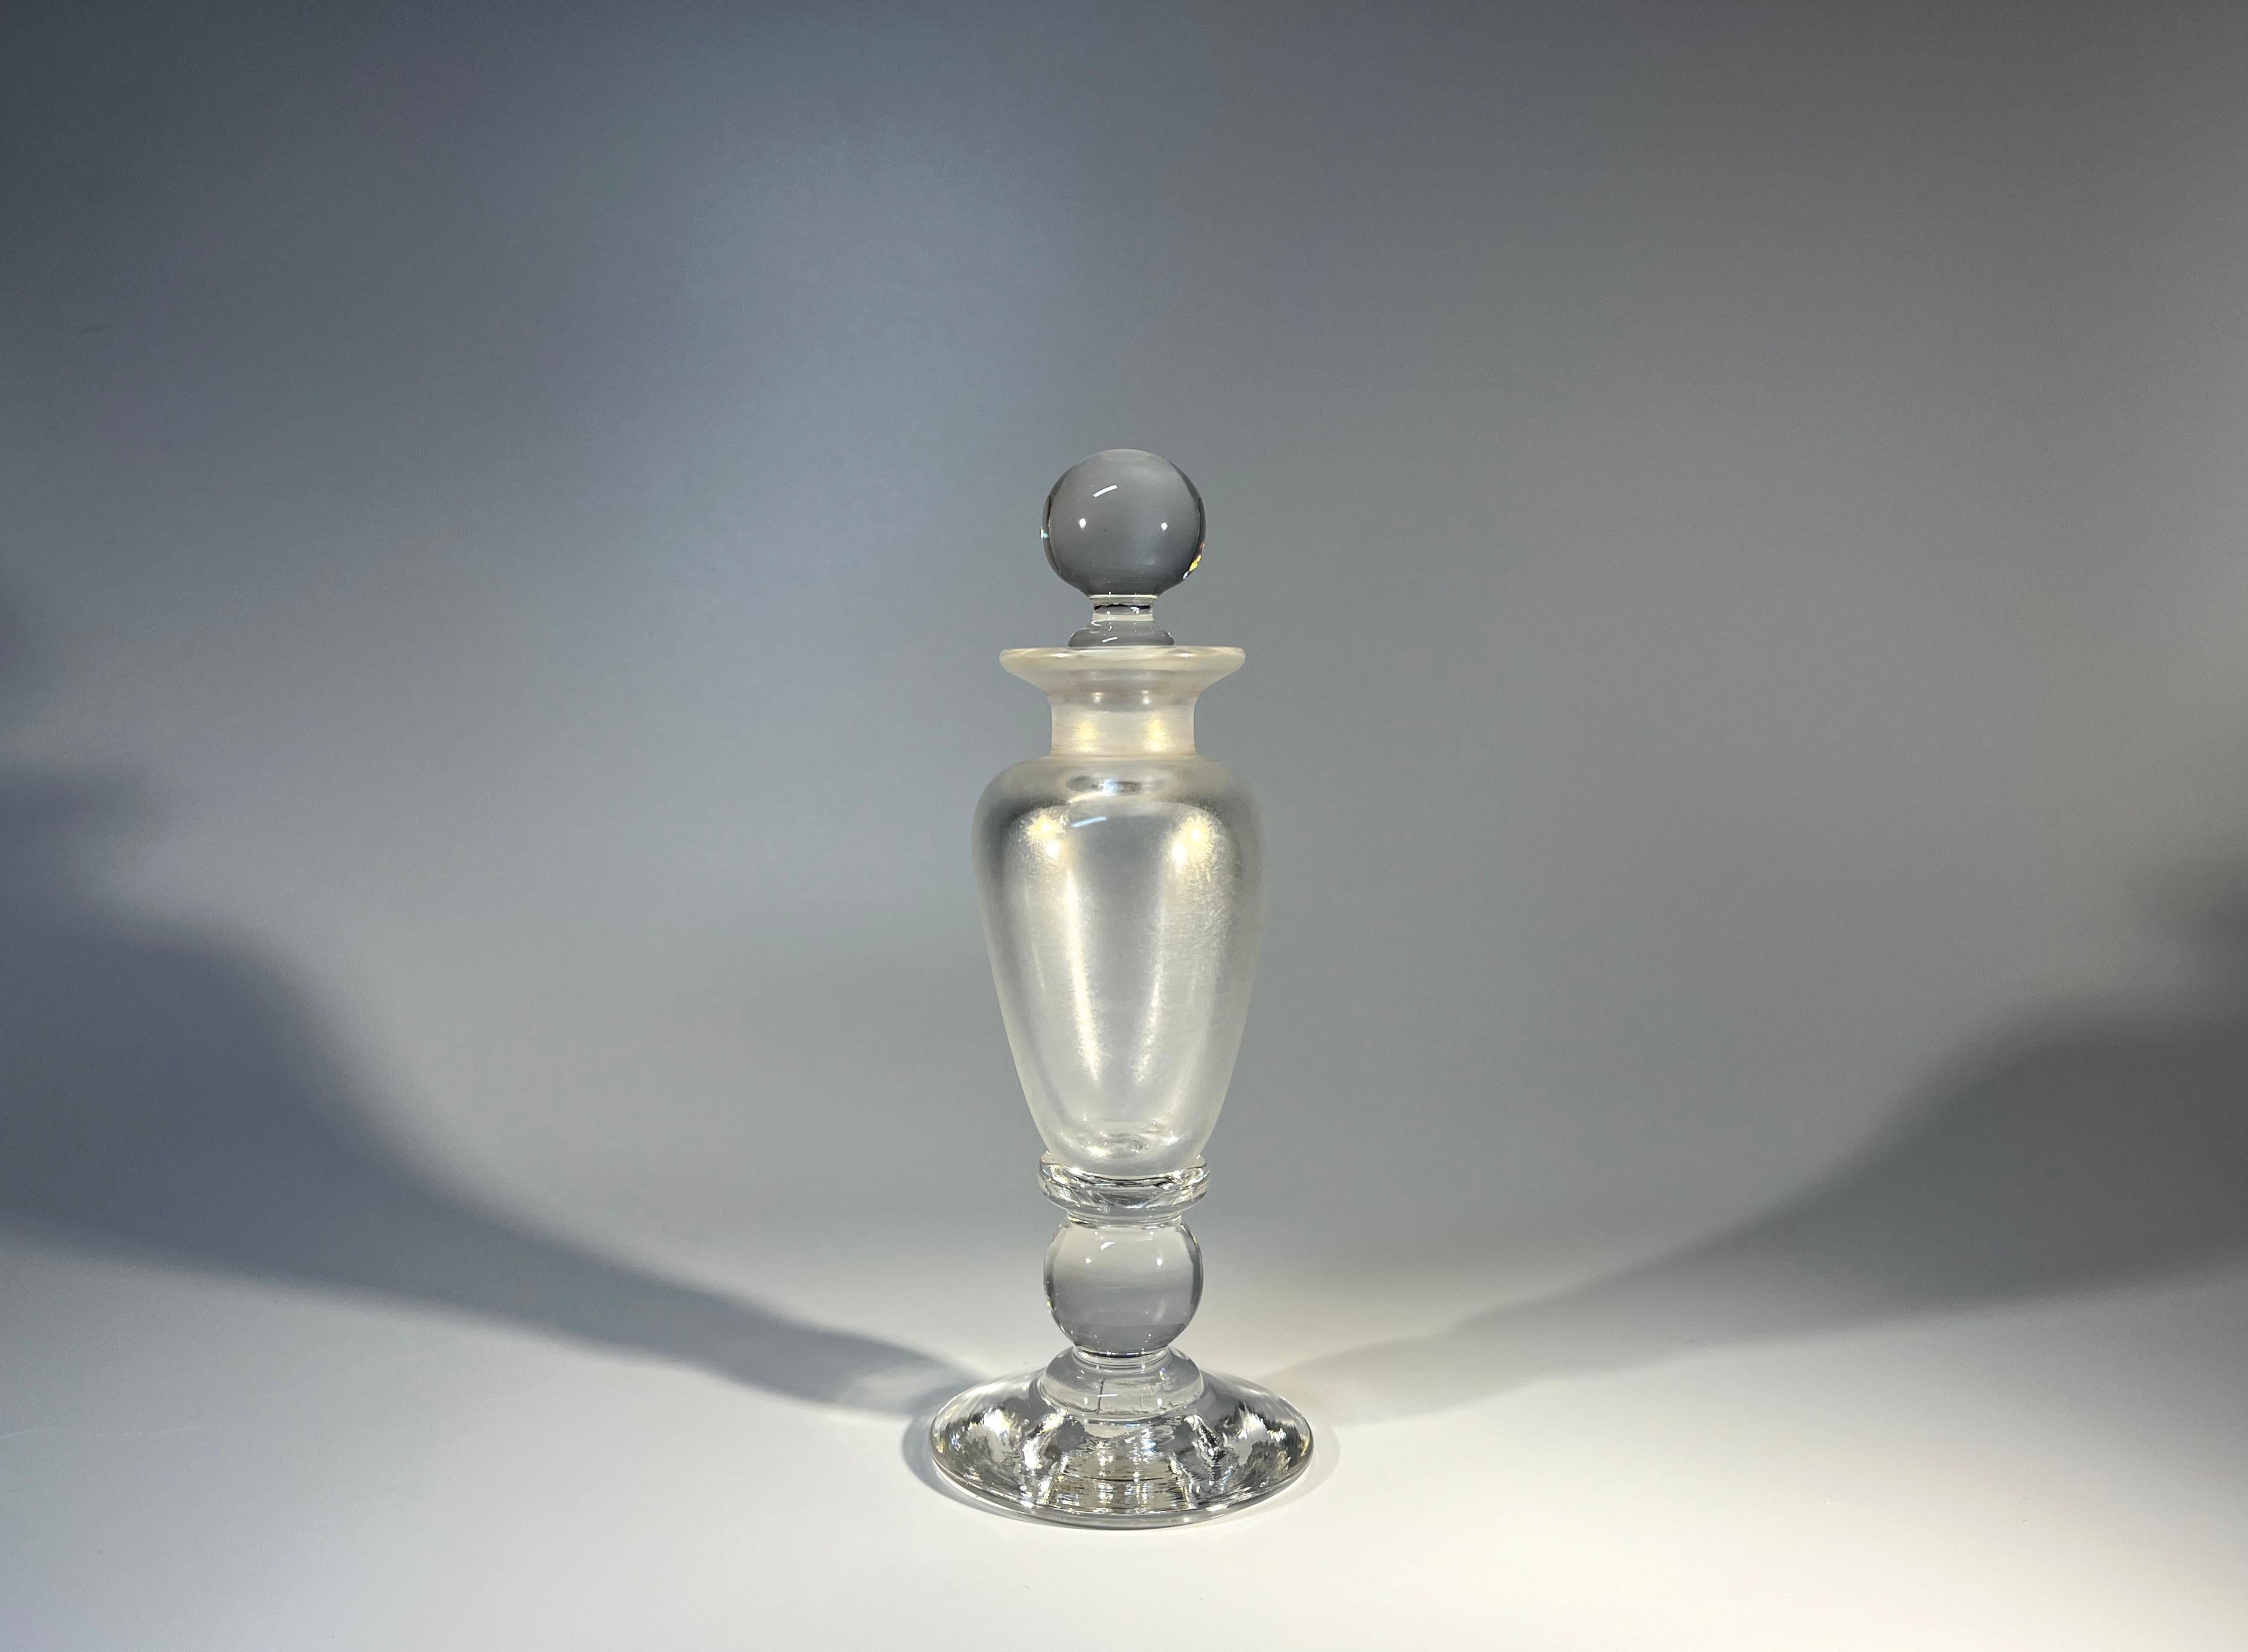 Sublime pearlescent, David Wallace of England, hand crafted glass perfume bottle
Perfectly understated and alluring 
Circa 1980's
Height 6.5 inch, Diameter 2.5 inch
In excellent condition
Wear consistent with age and use